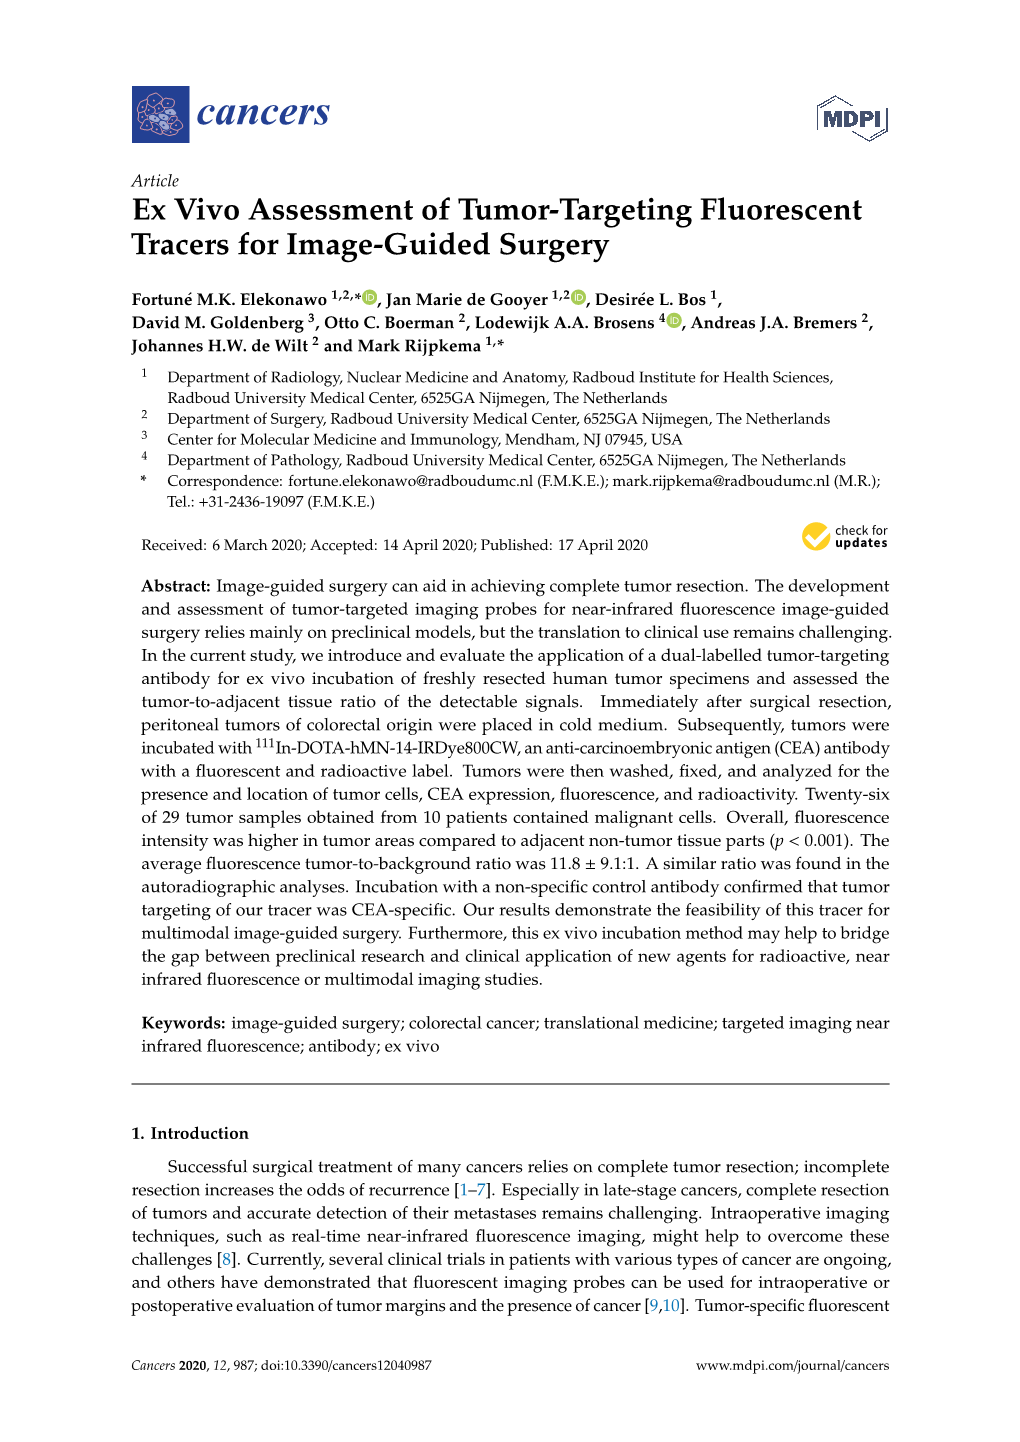 Ex Vivo Assessment of Tumor-Targeting Fluorescent Tracers for Image-Guided Surgery